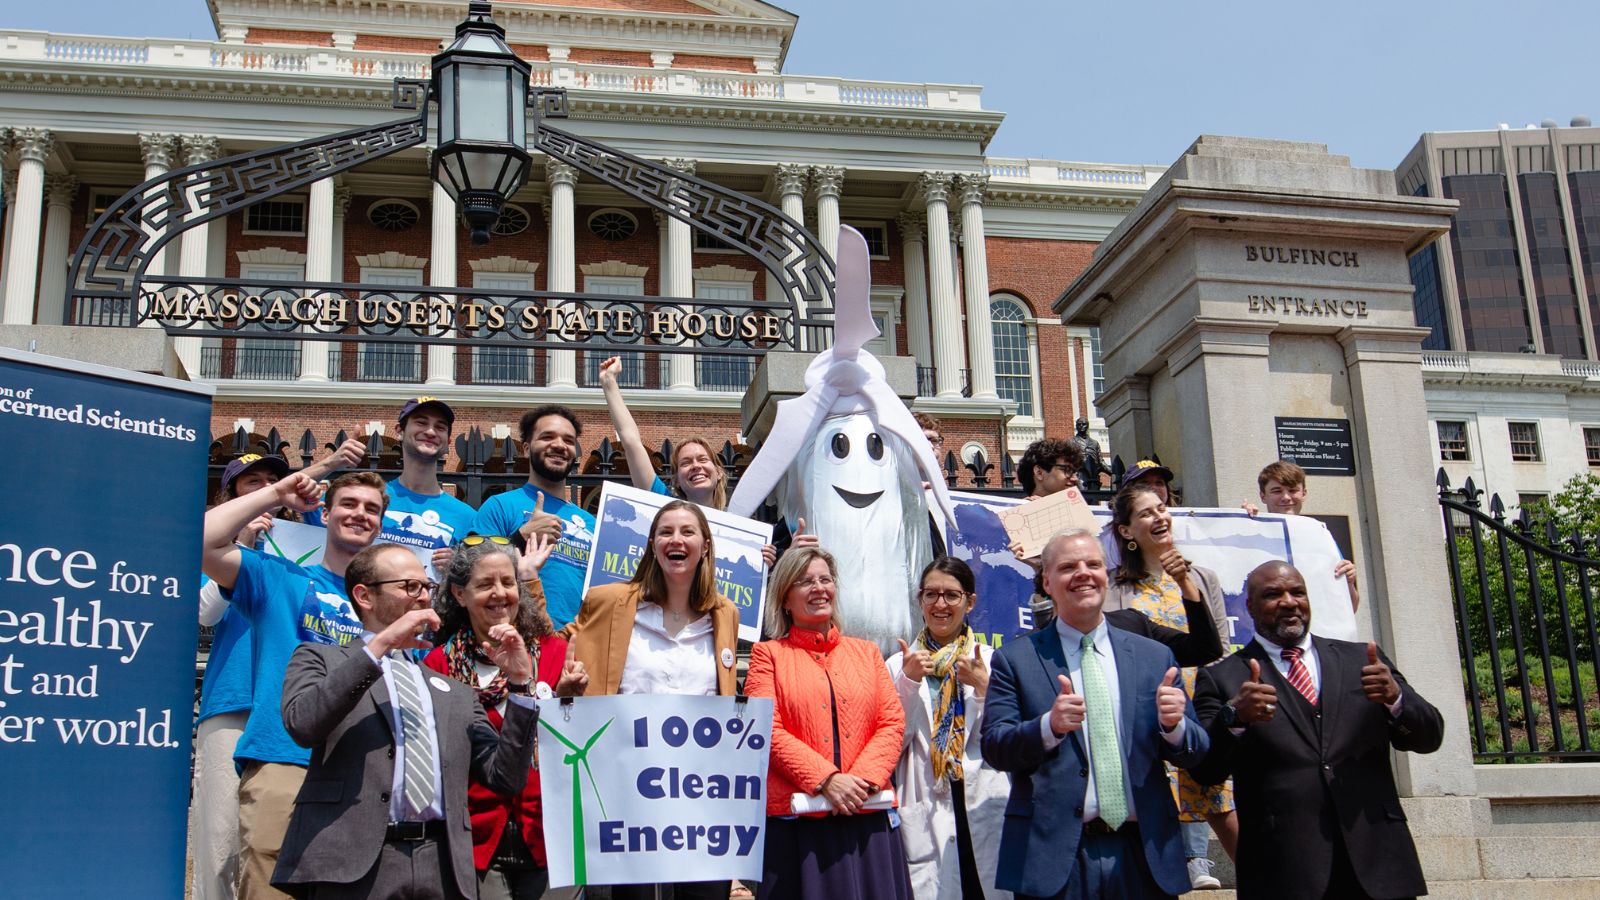 Legislators and climate advocates gather at the Massachusetts State House to celebrate a vision of 100% clean energy. A sign reads 